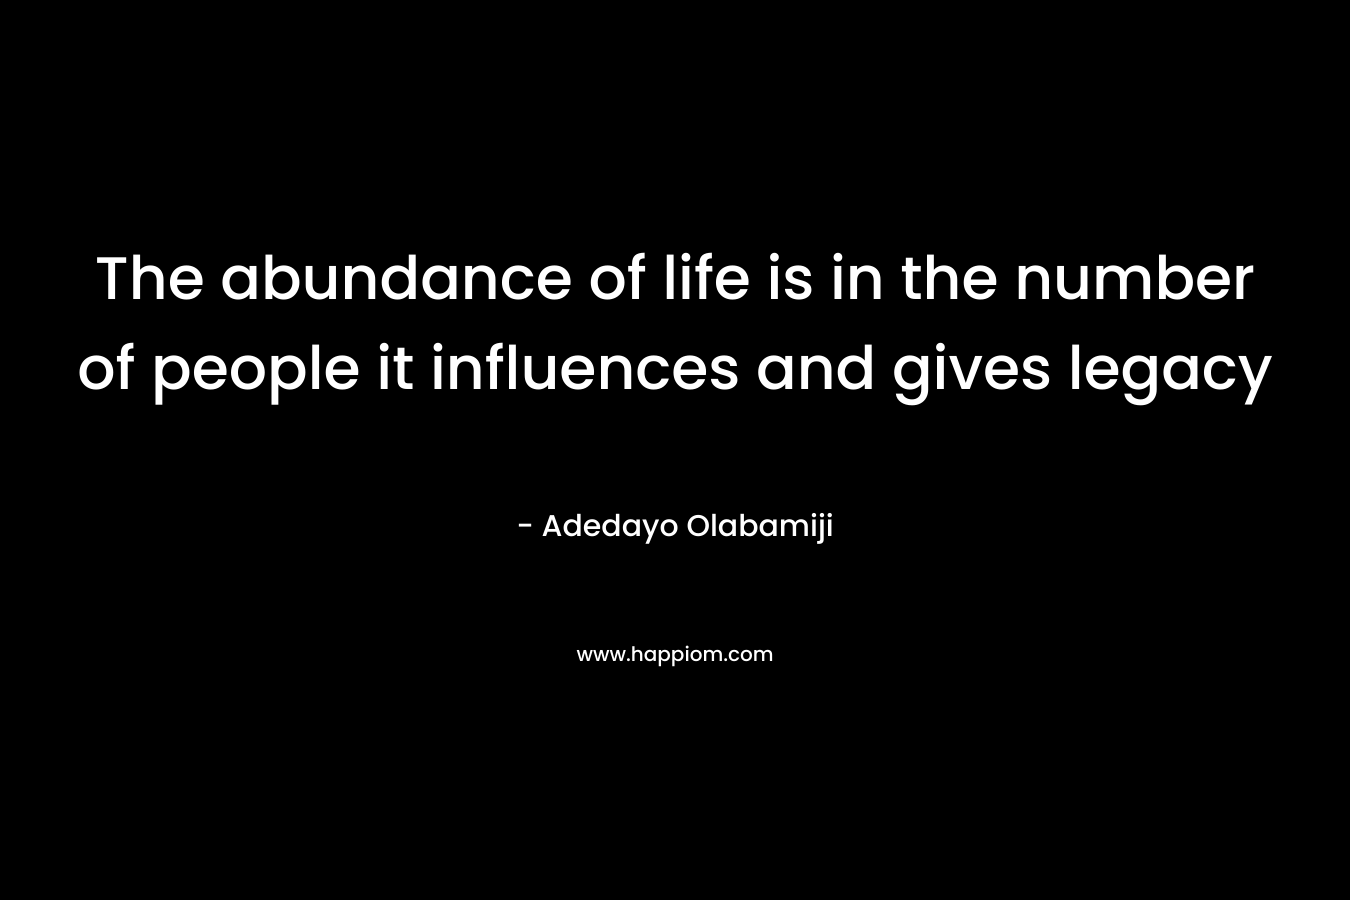 The abundance of life is in the number of people it influences and gives legacy